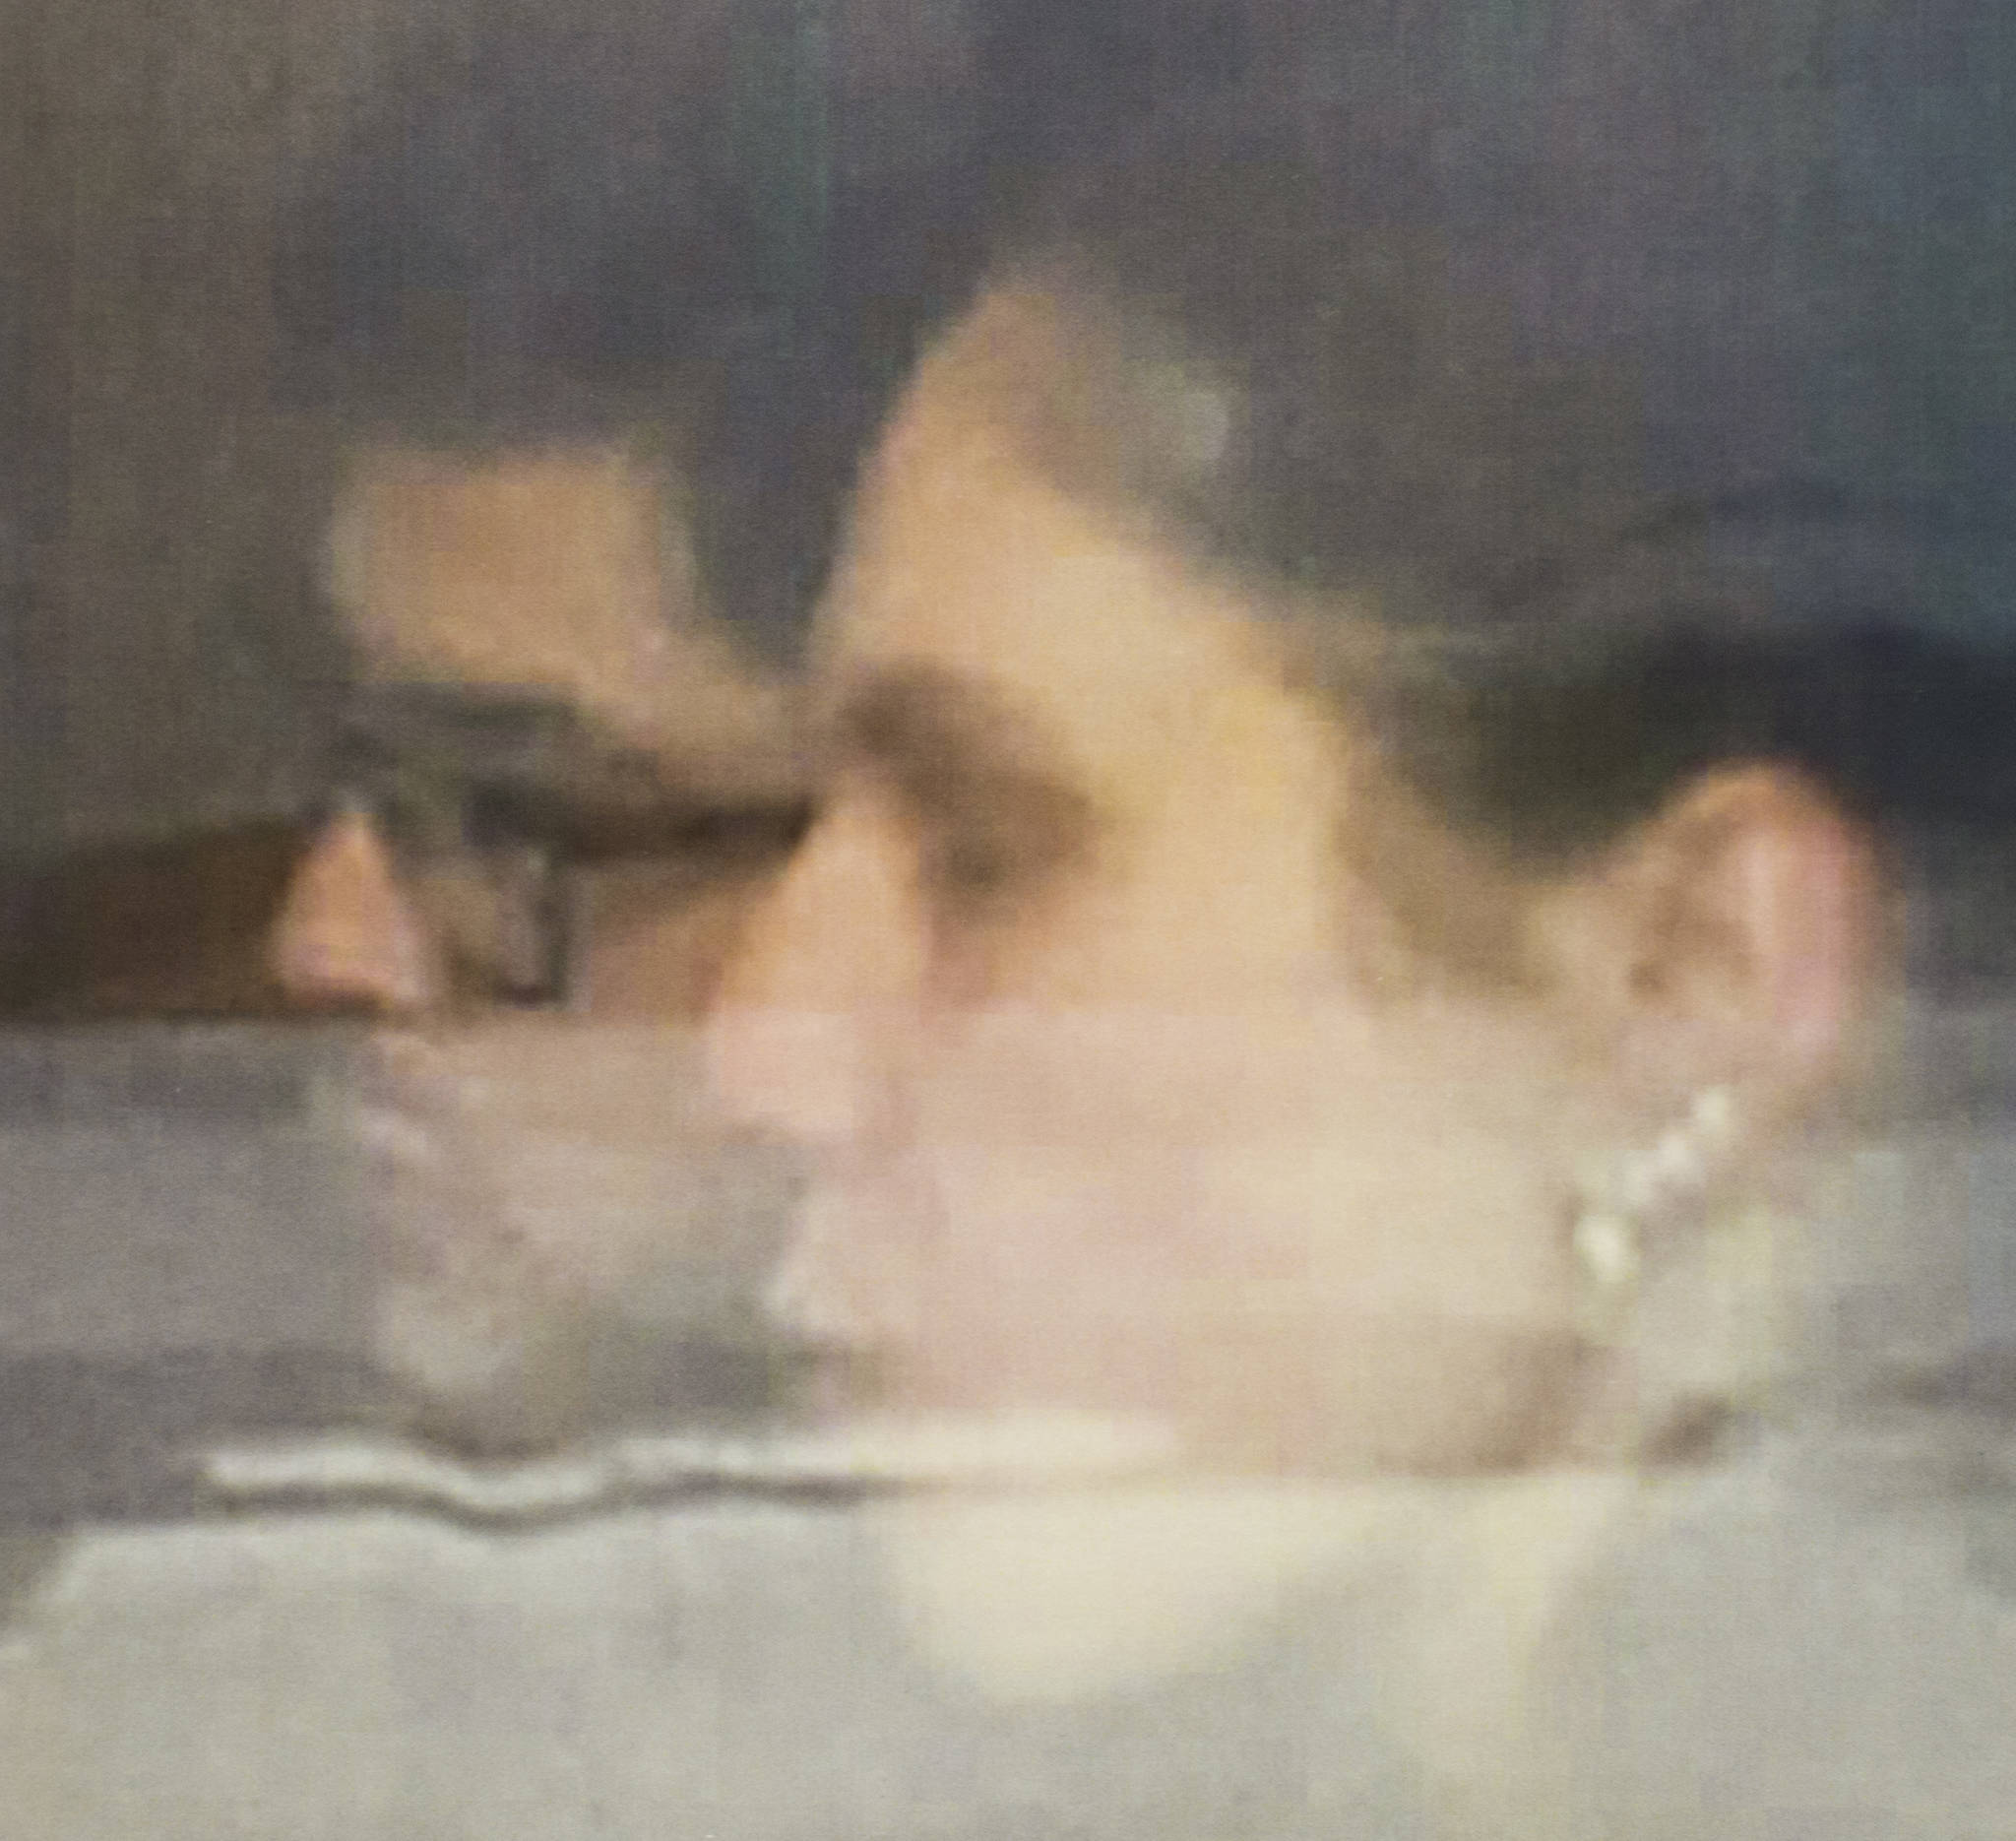 This photo of a couple eating at the Valley Restaurant on Oct. 6 could be Christopher Orcutt and an unidentified woman.